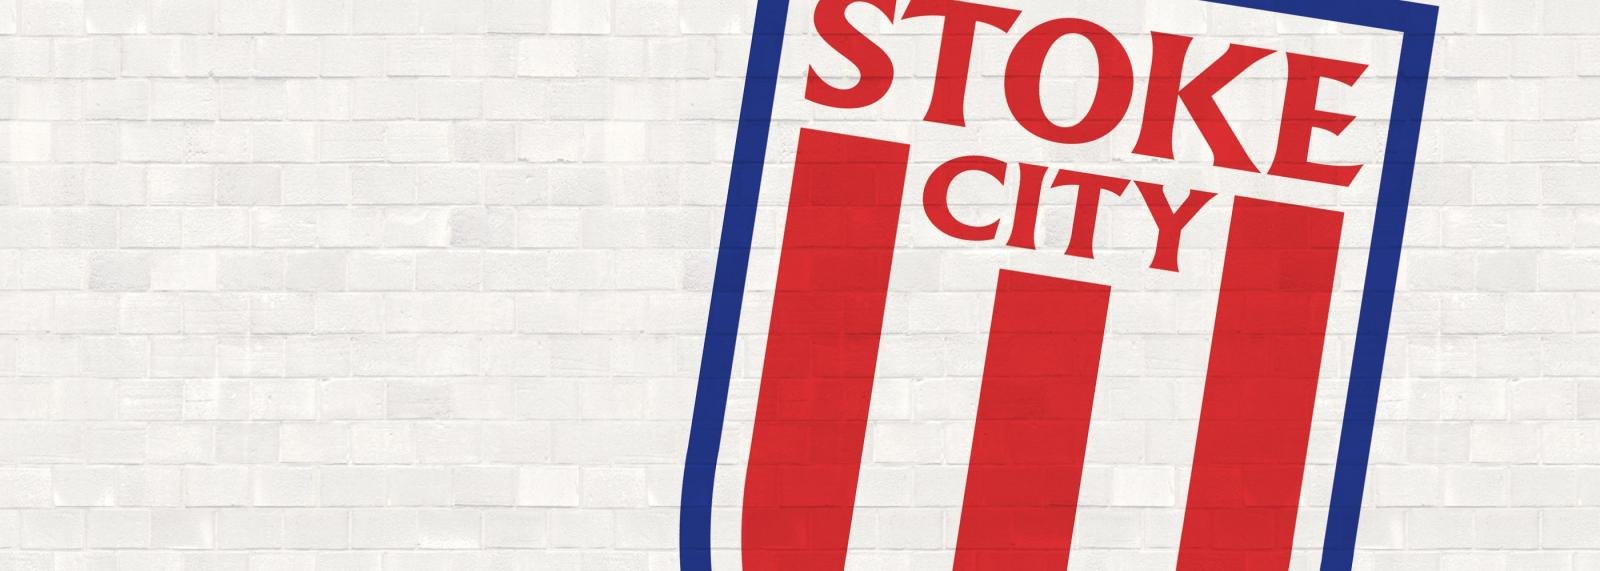 Stoke City on song for record Premier League points total, perhaps a Europa League spot too?